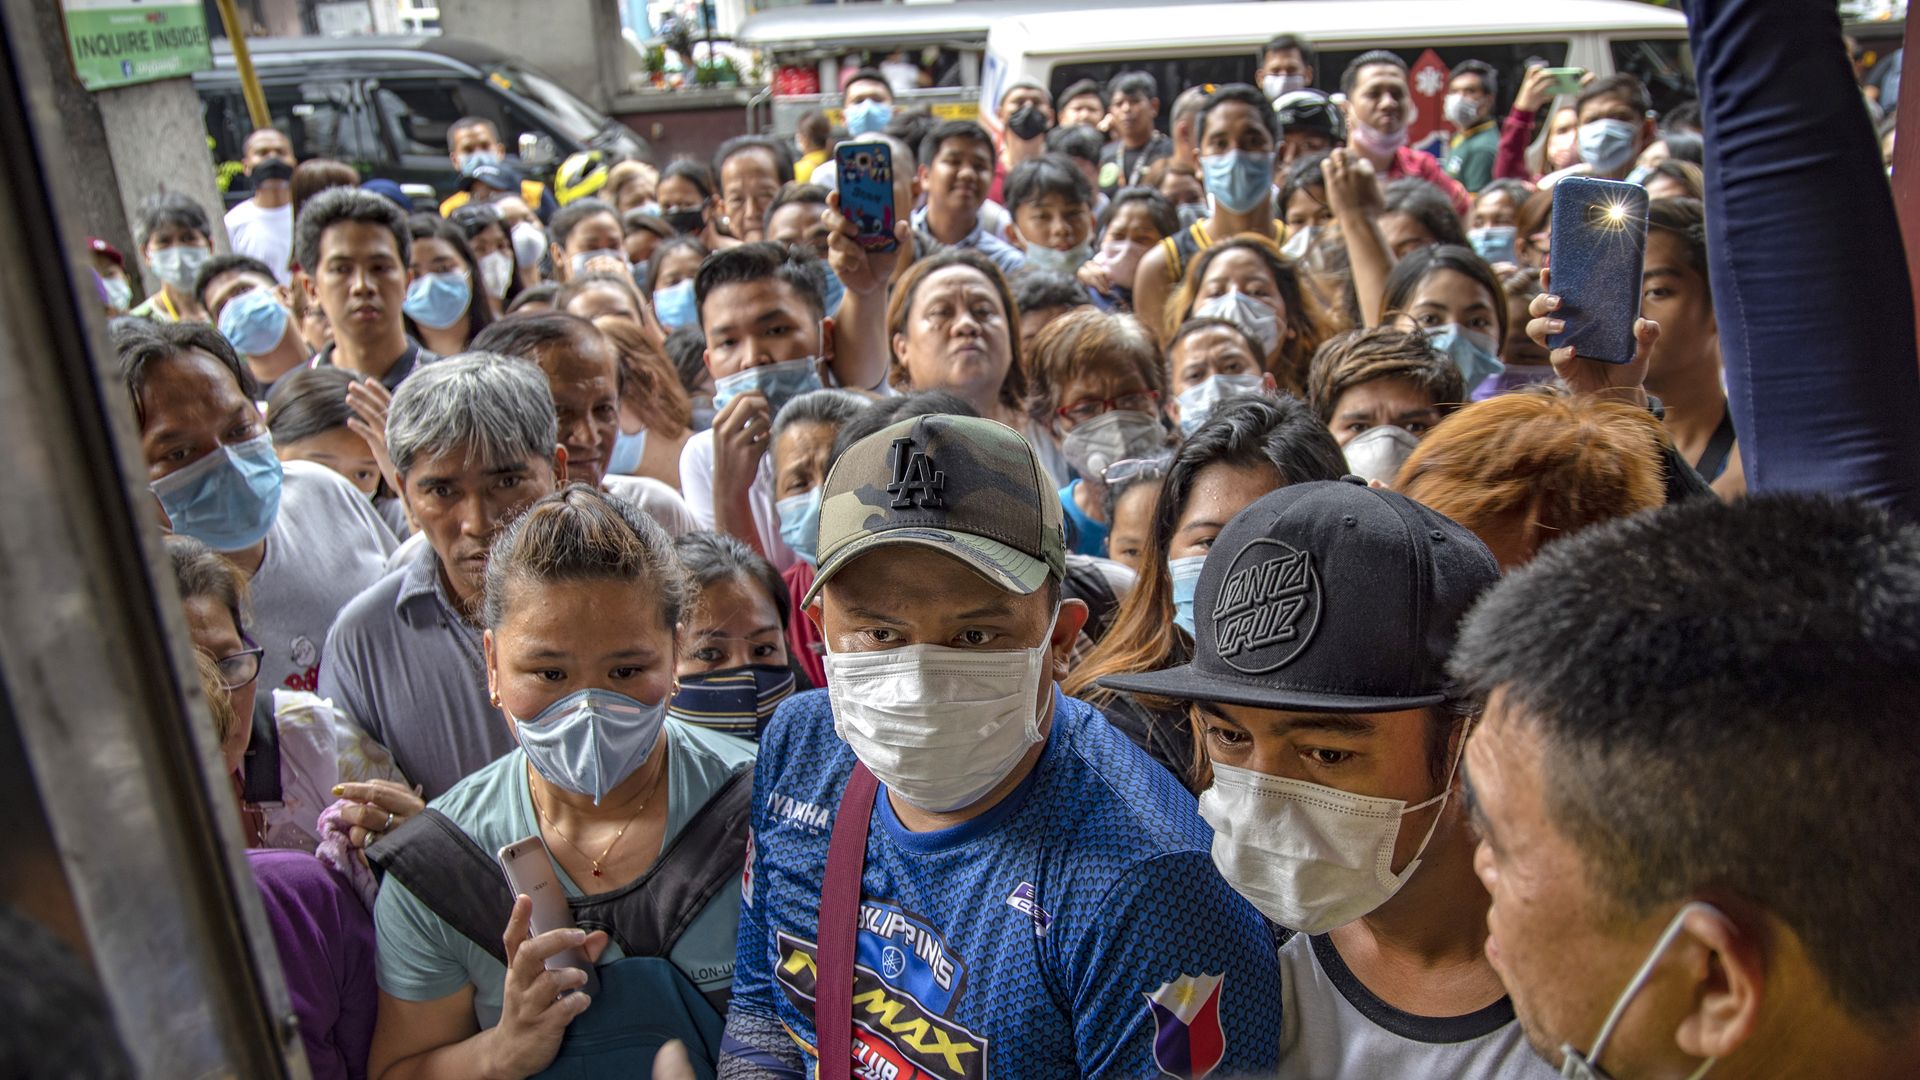  Filipinos hoping to buy face masks crowd outside a medical supply shop that was raided by police for allegedly hoarding and overpricing the masks